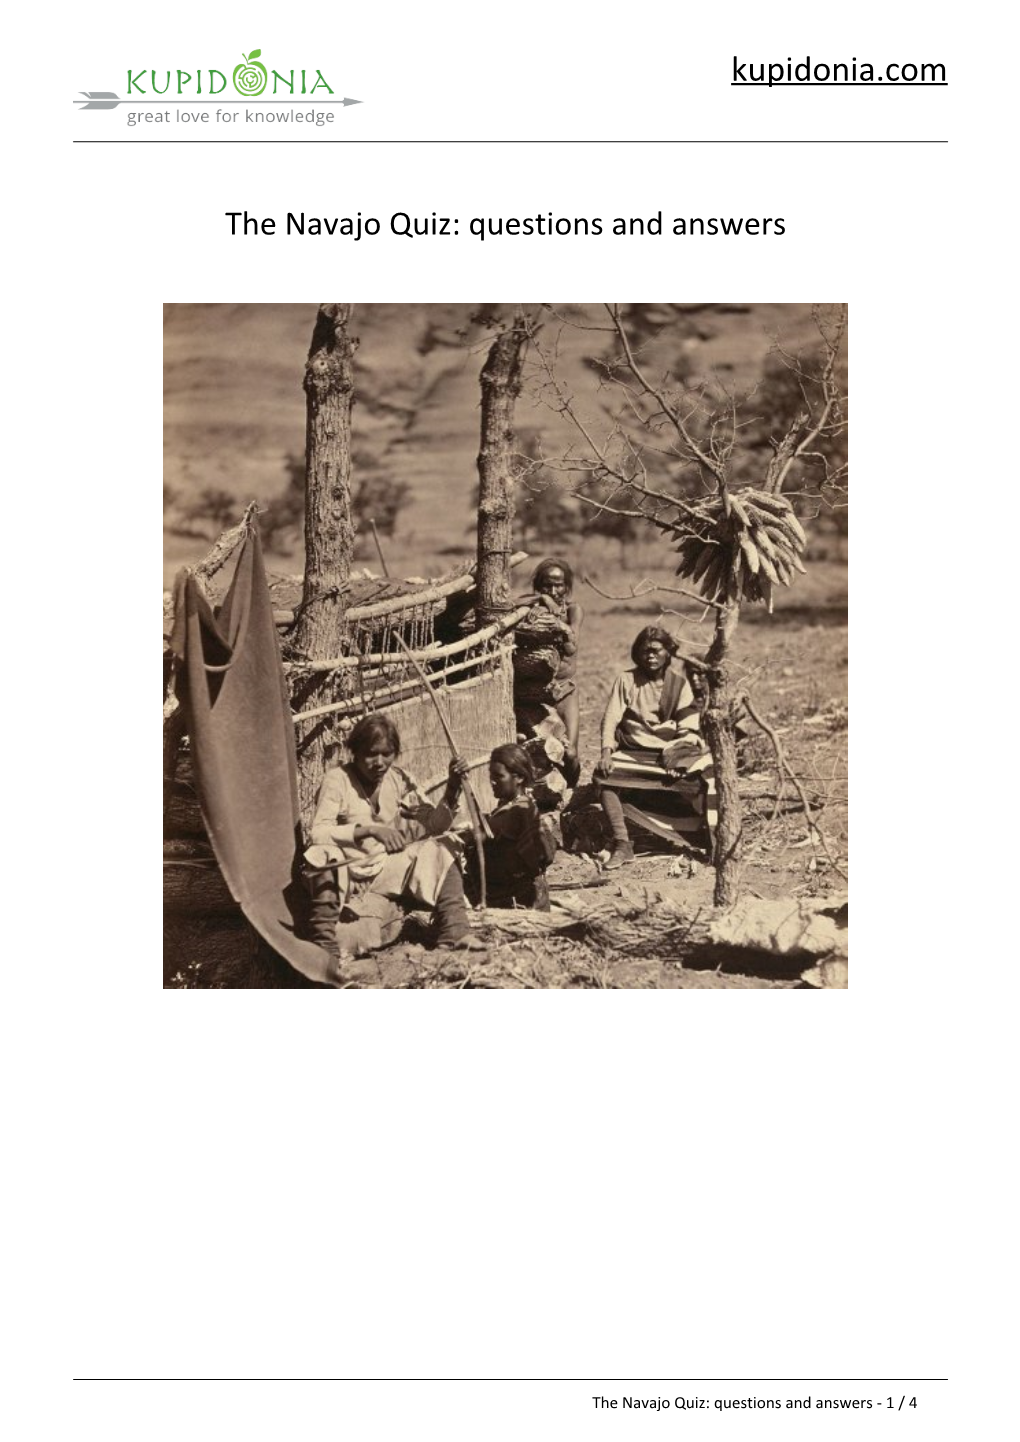 The Navajo Quiz: Questions and Answers